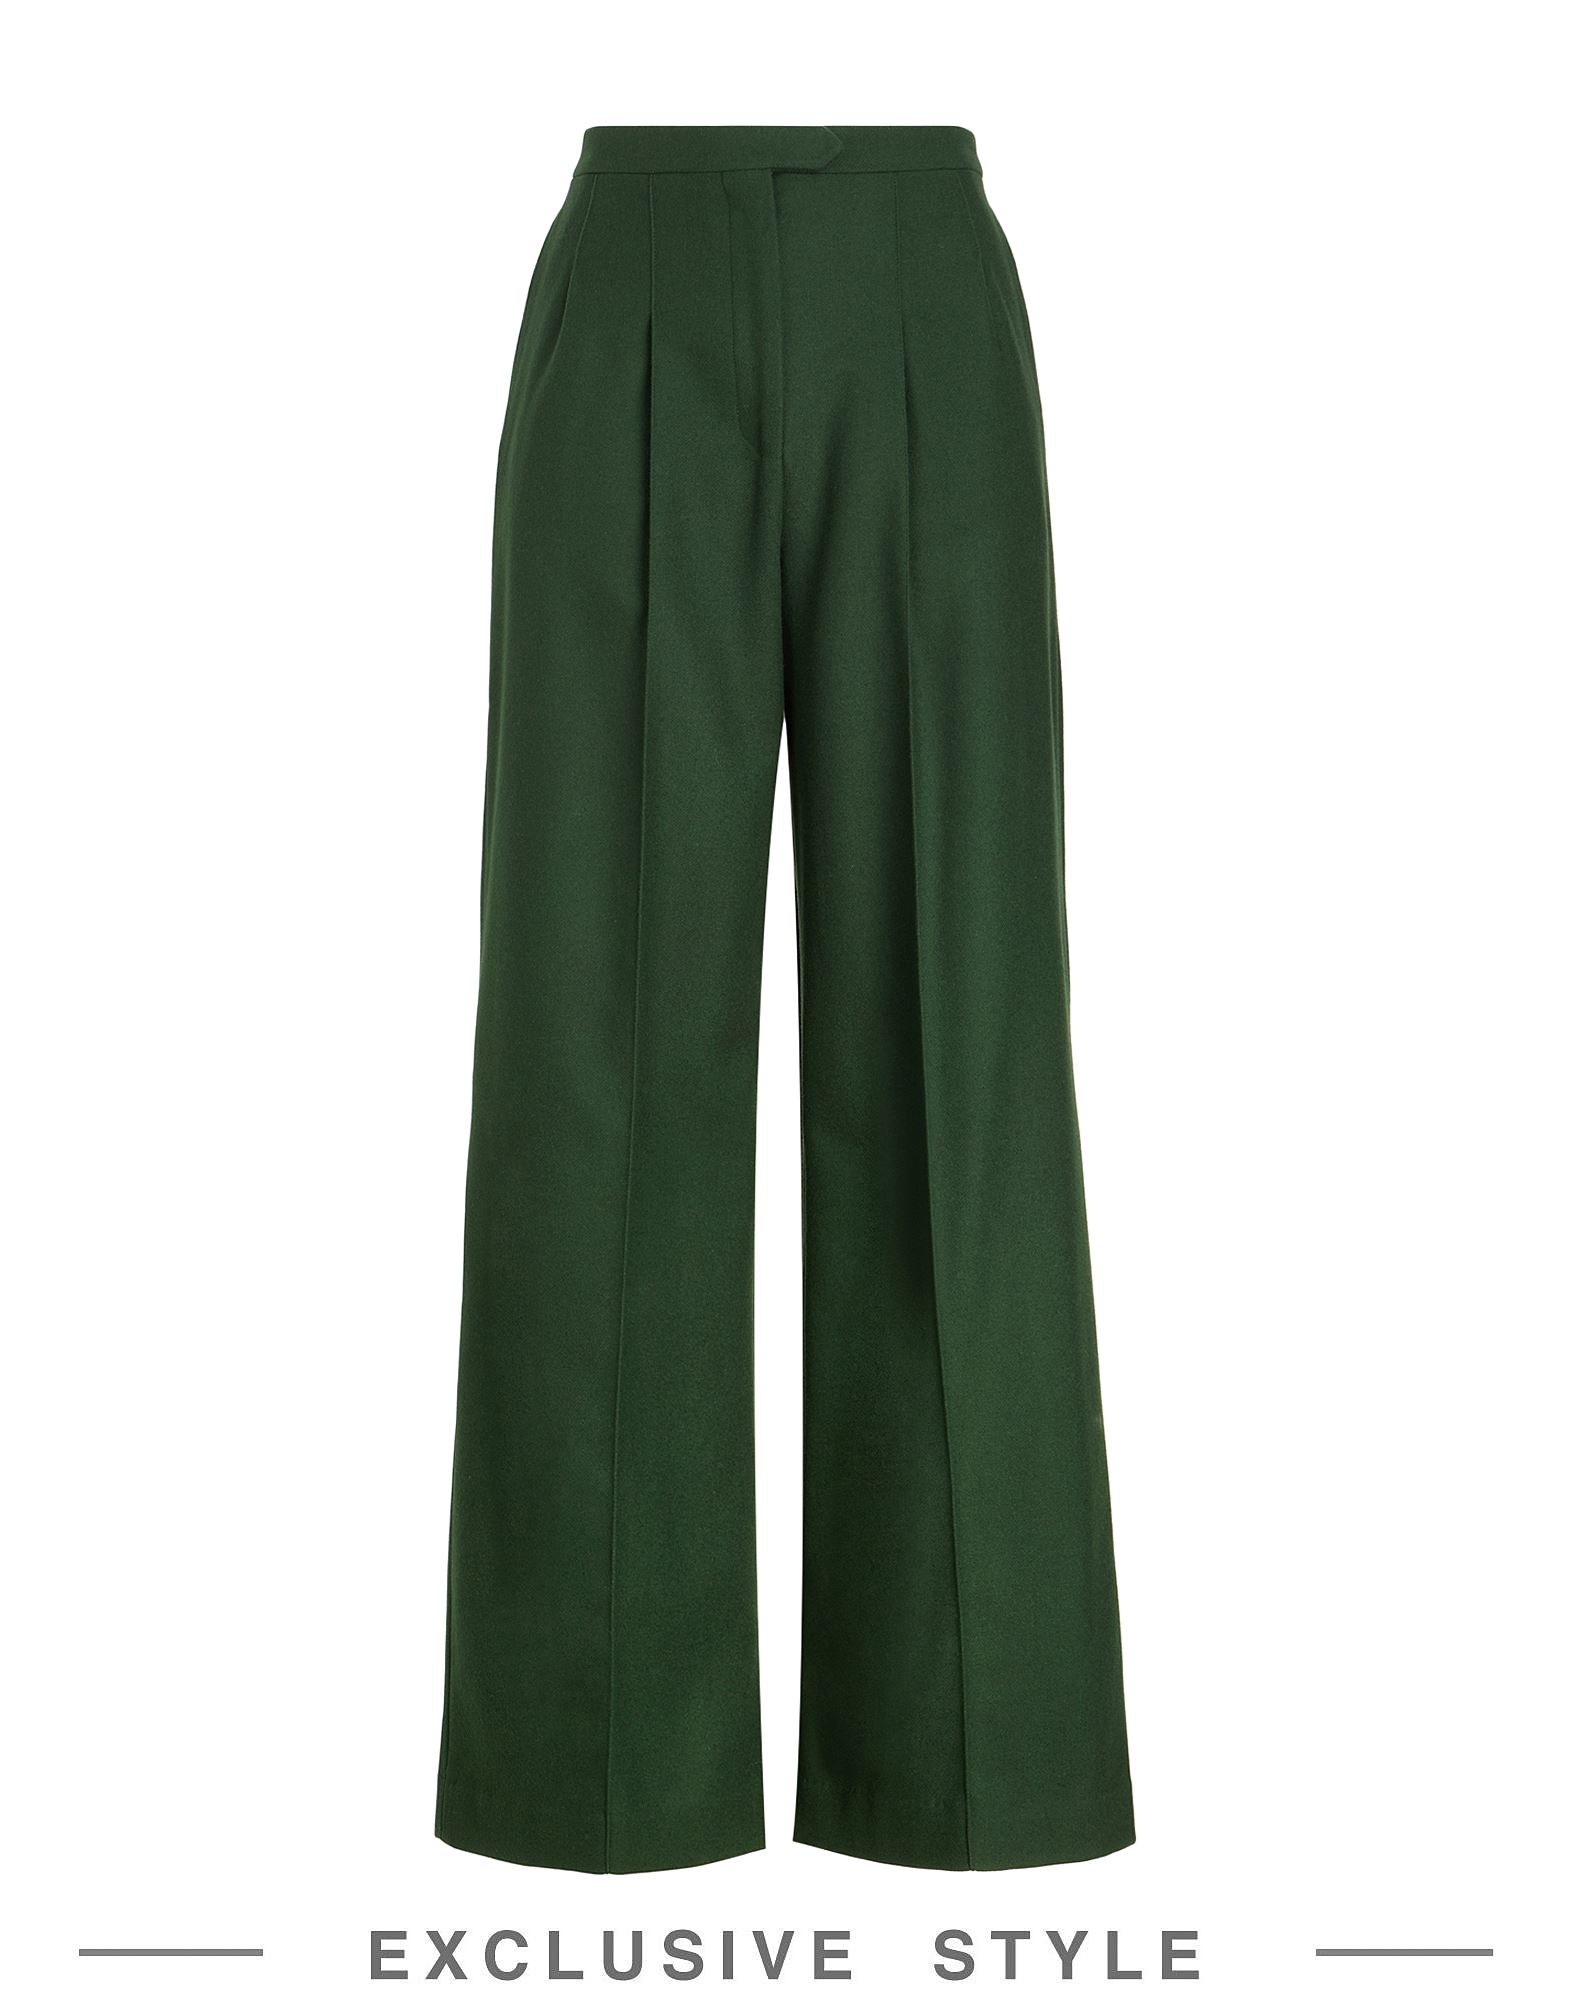 Yoox Net-a-porter For The Prince's Foundation Pants In Green